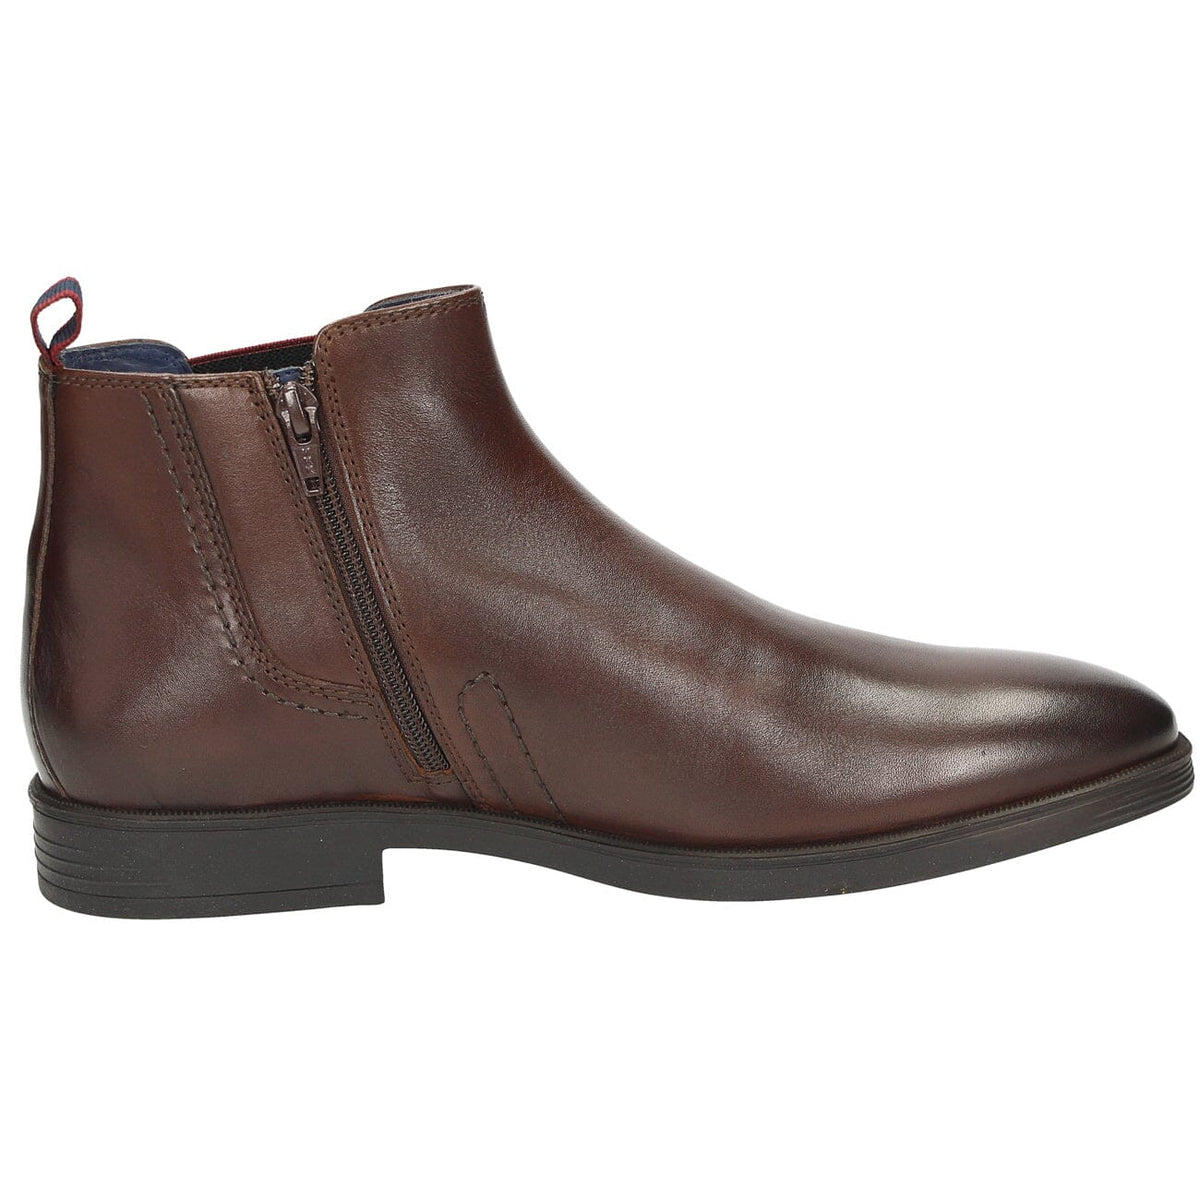 Sioux, FORIOLO, Boot, Leather, Dark Nut Boots Sioux 